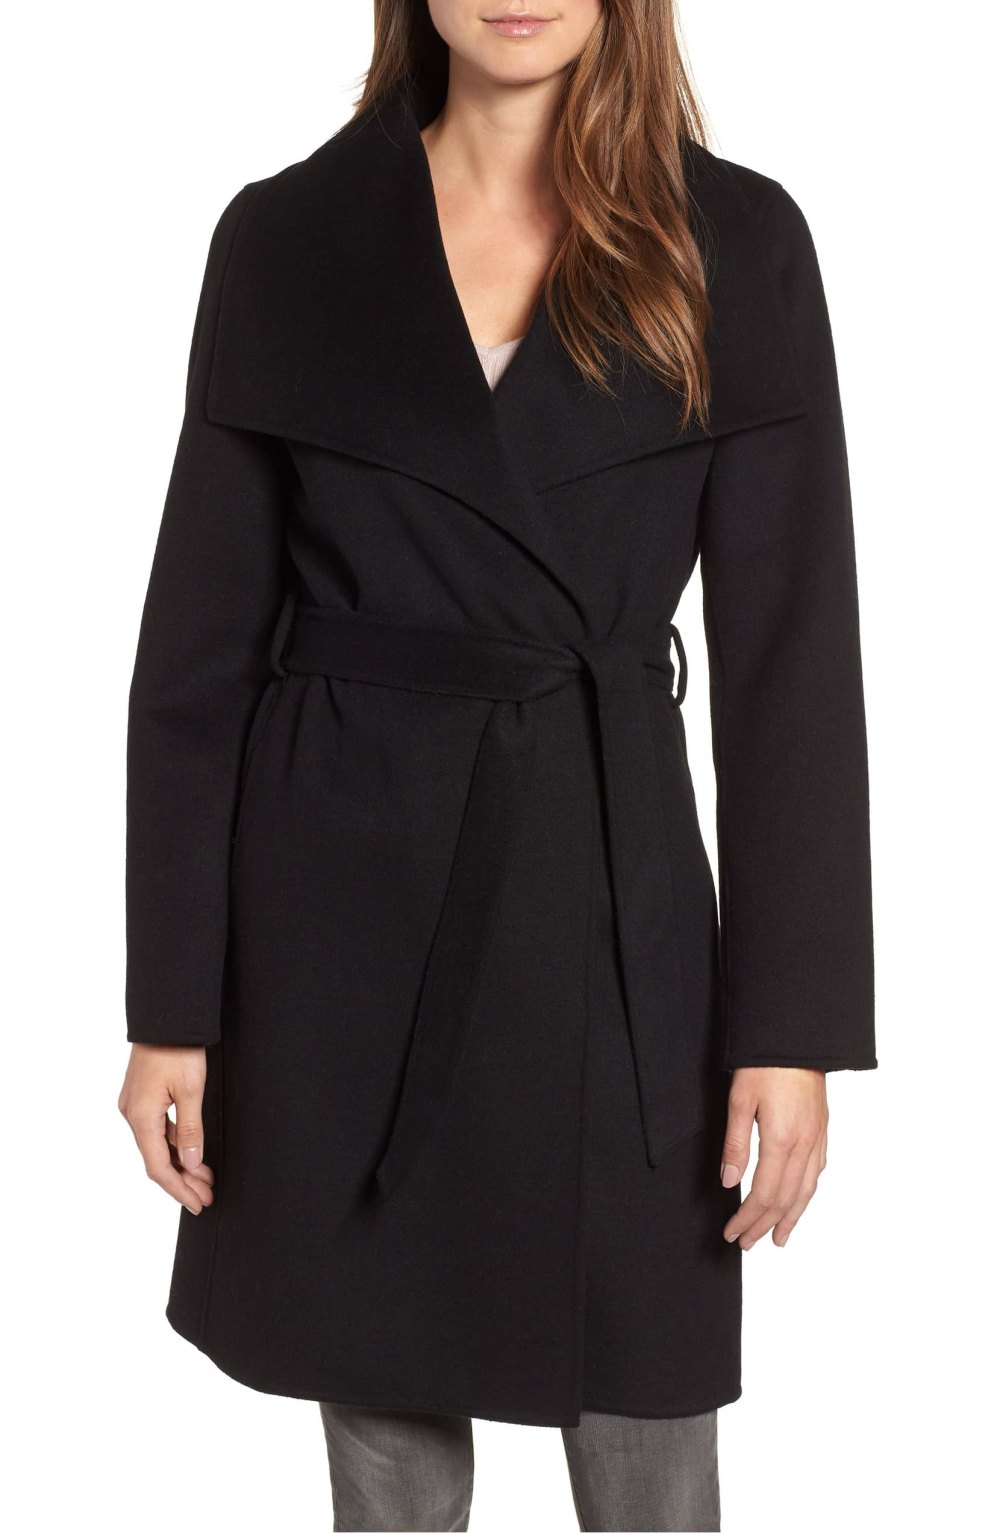 This Wrap Coat Is Comfy, Chic & Fresh on the Nordstrom Sale Rack | UsWeekly